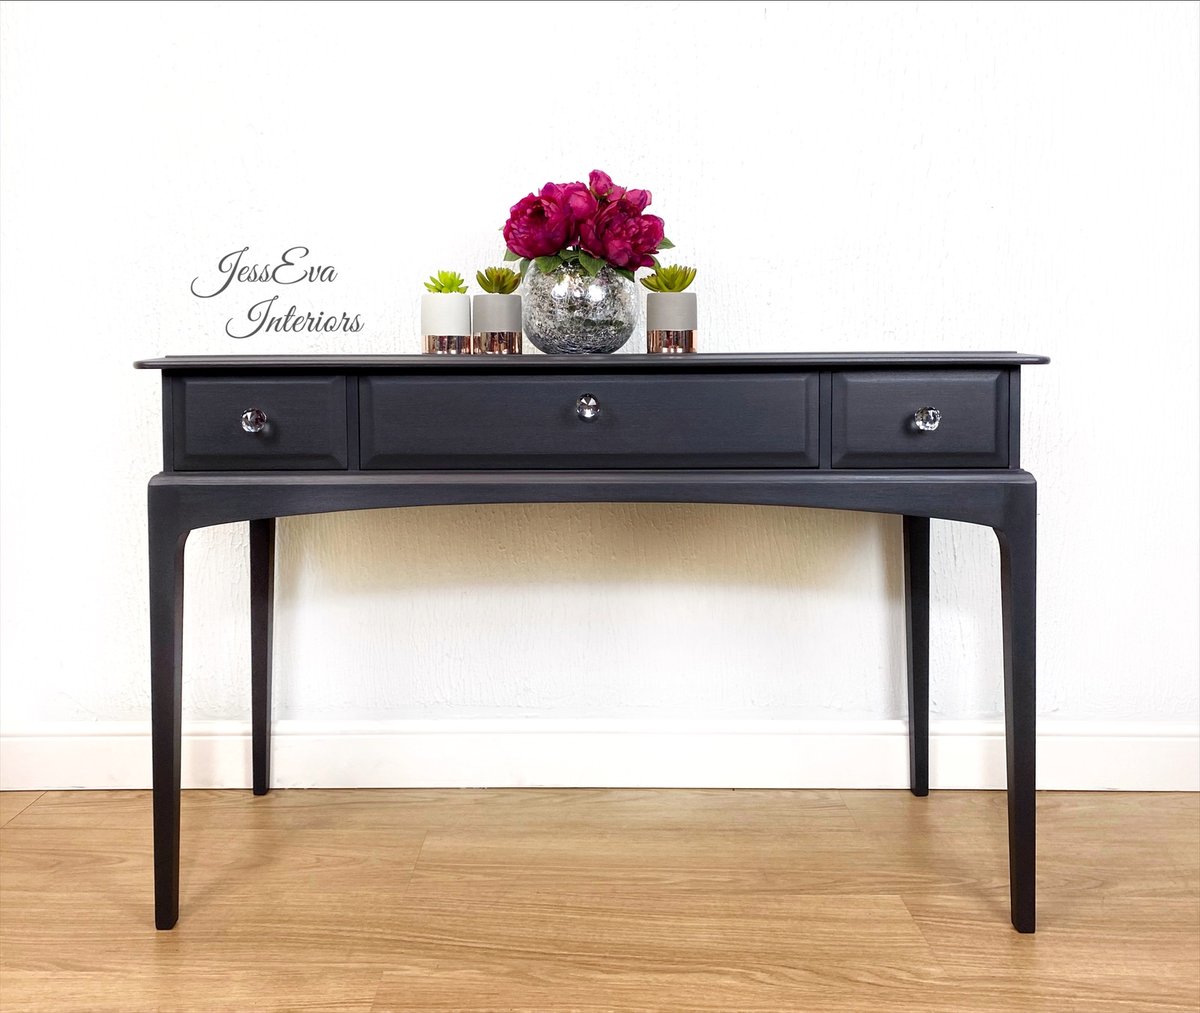 Stag Minstrel CONSOLE TABLE / DRESSING TABLE painted in Dark Grey/Charcoal colour.